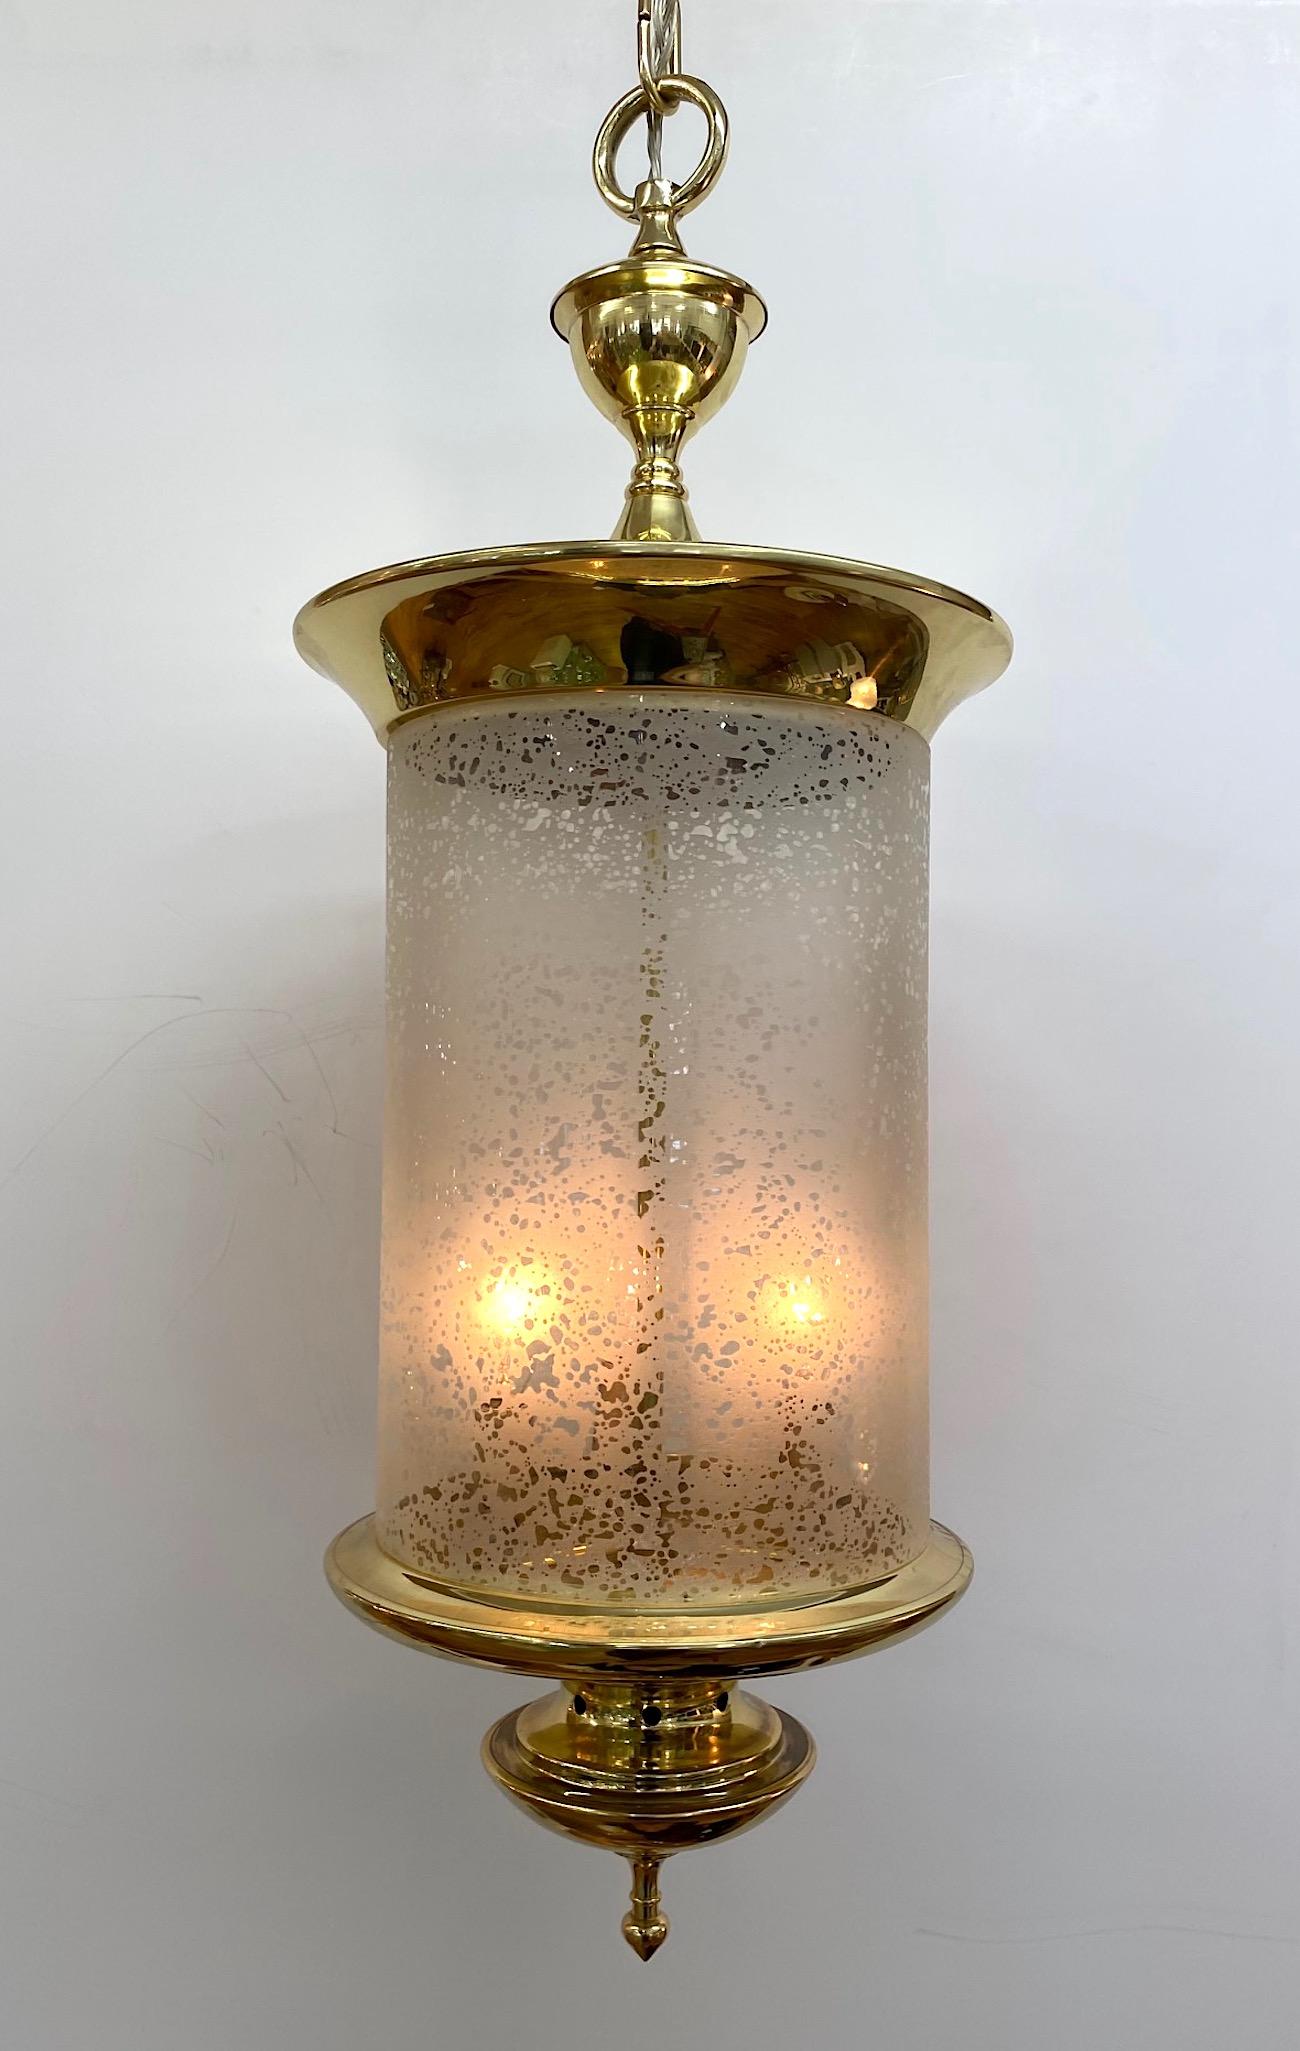 An elegant classic design Italian brass lantern, circa 1950. The brass is newly polished and lacquered. The hand blown glass shade is acid etched with a clear and frosted mottled pattern to soften the light. Original chain and ceiling canopy. The